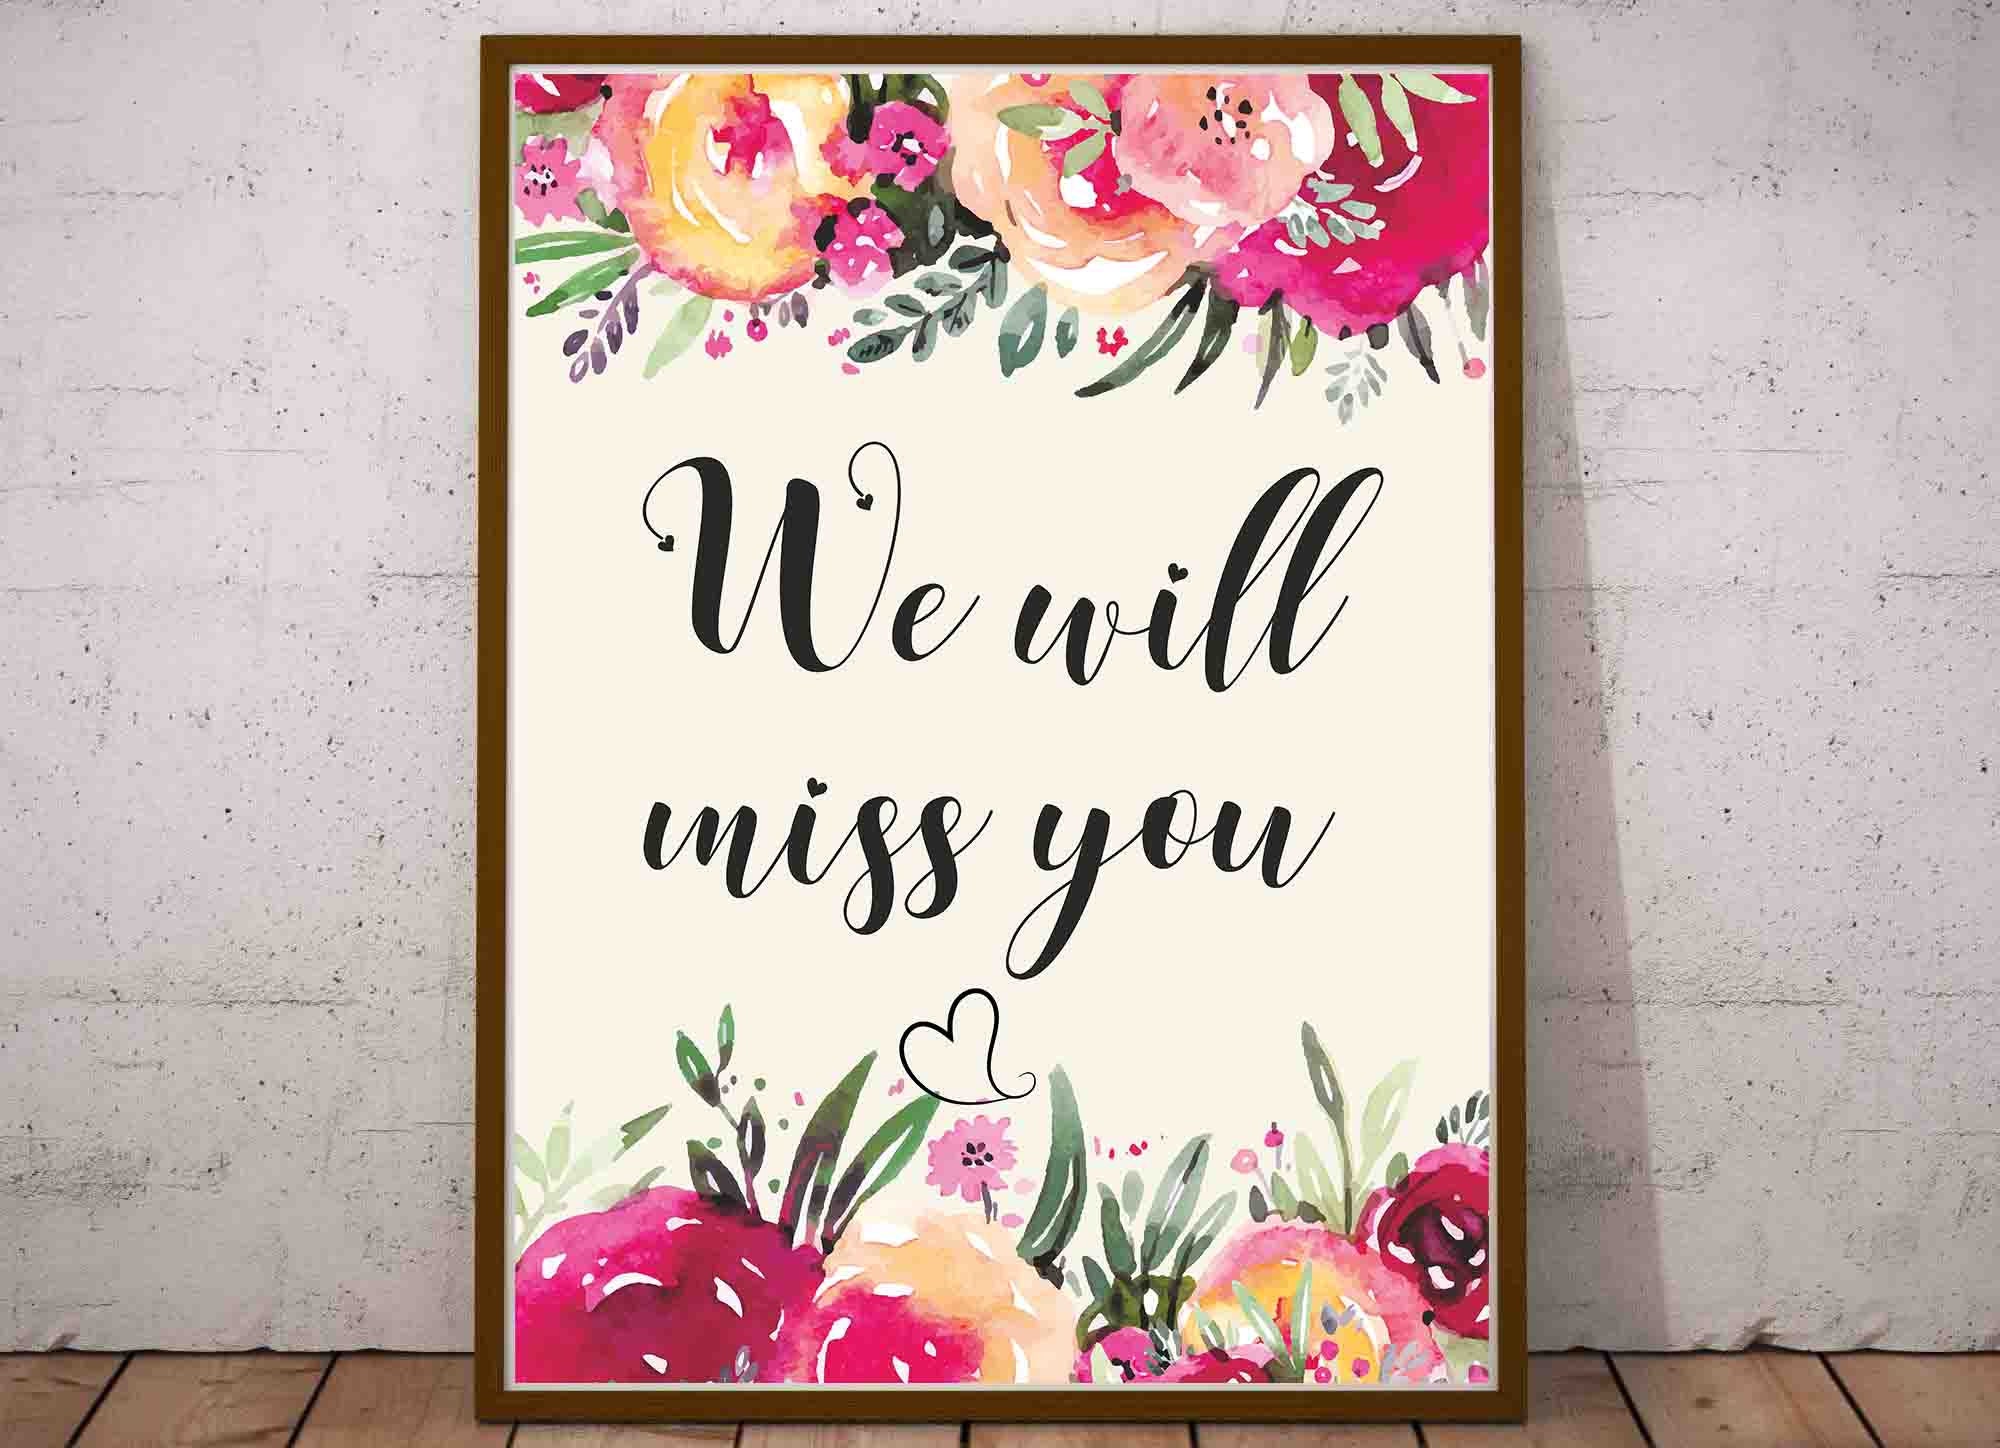 Farewell Party Decorations Jumbo Farewell Greeting Card Goodbye Card Guest Book We Will Miss You Gifts for Office Women Coworker Retirement Going Away Party Suppiles 14 x 22 Inches 